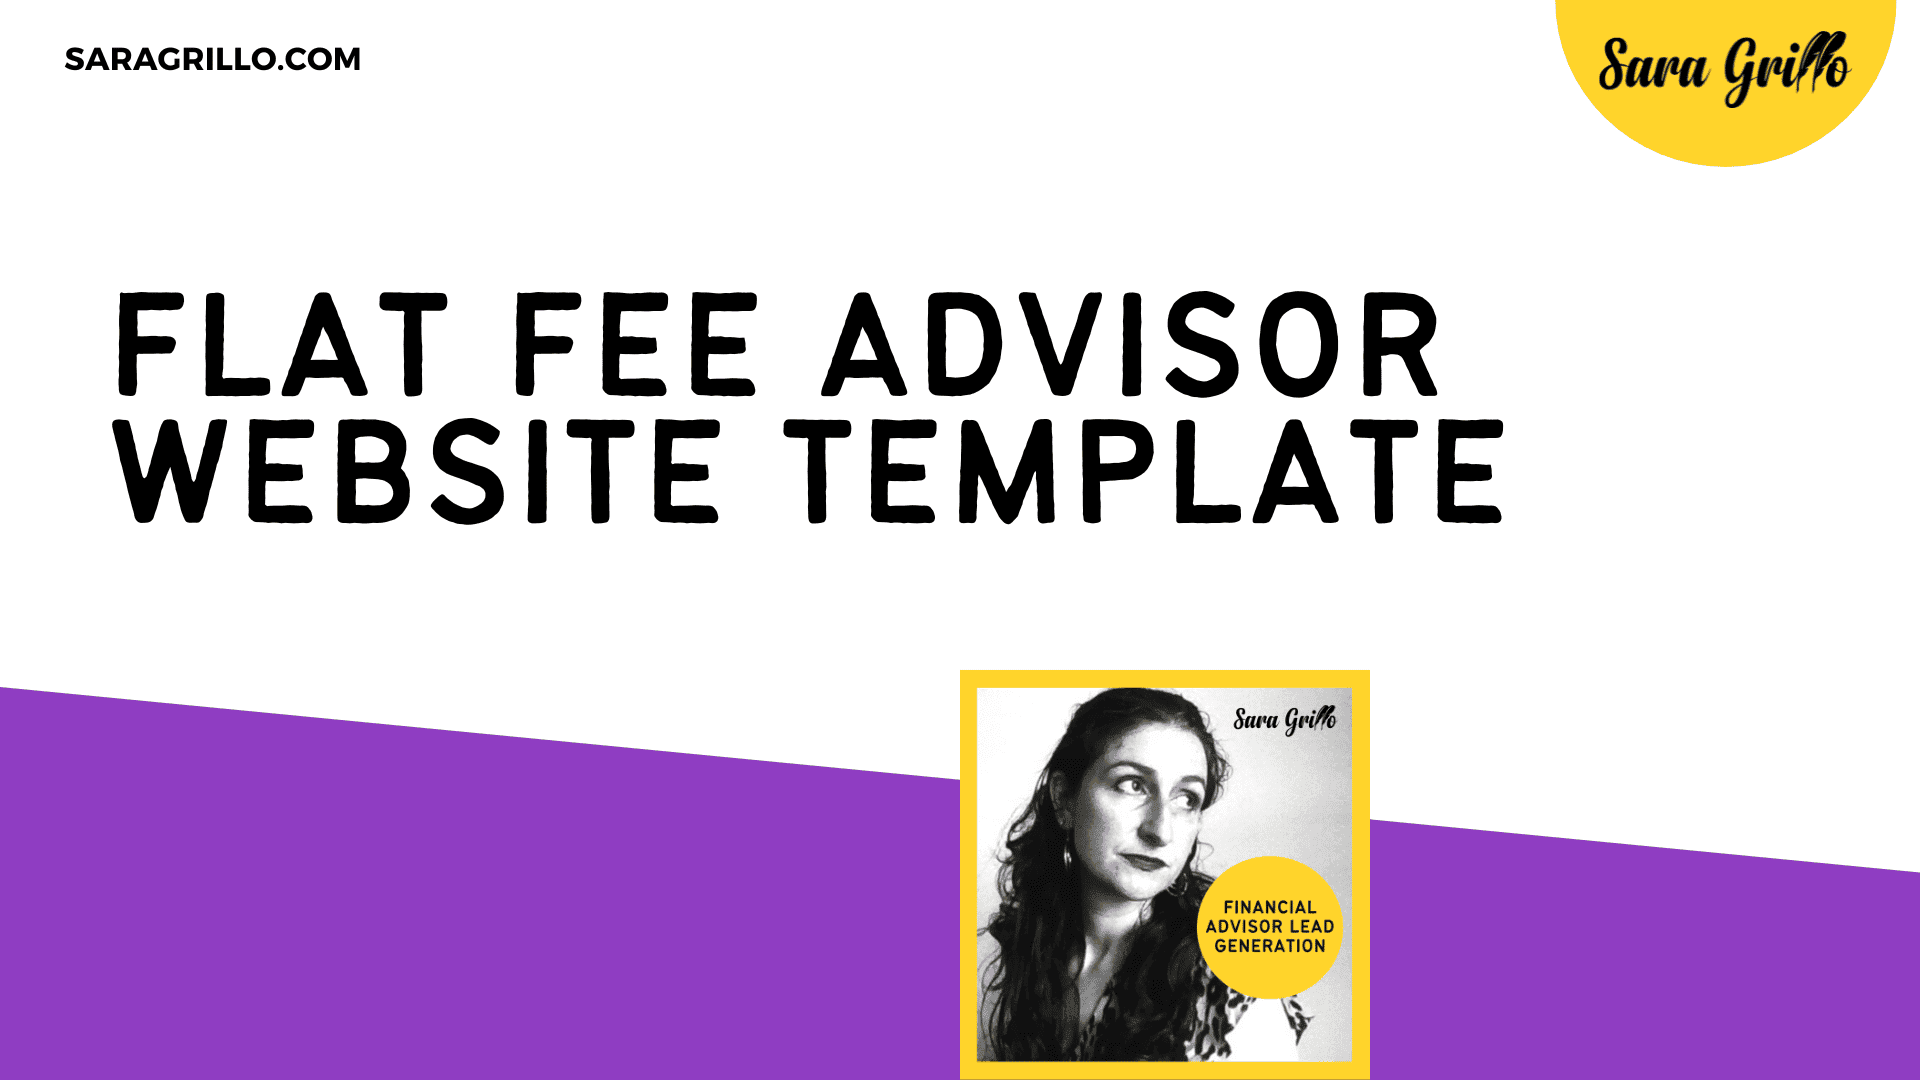 This blog contains copy you can use in your flat fee advisor website!